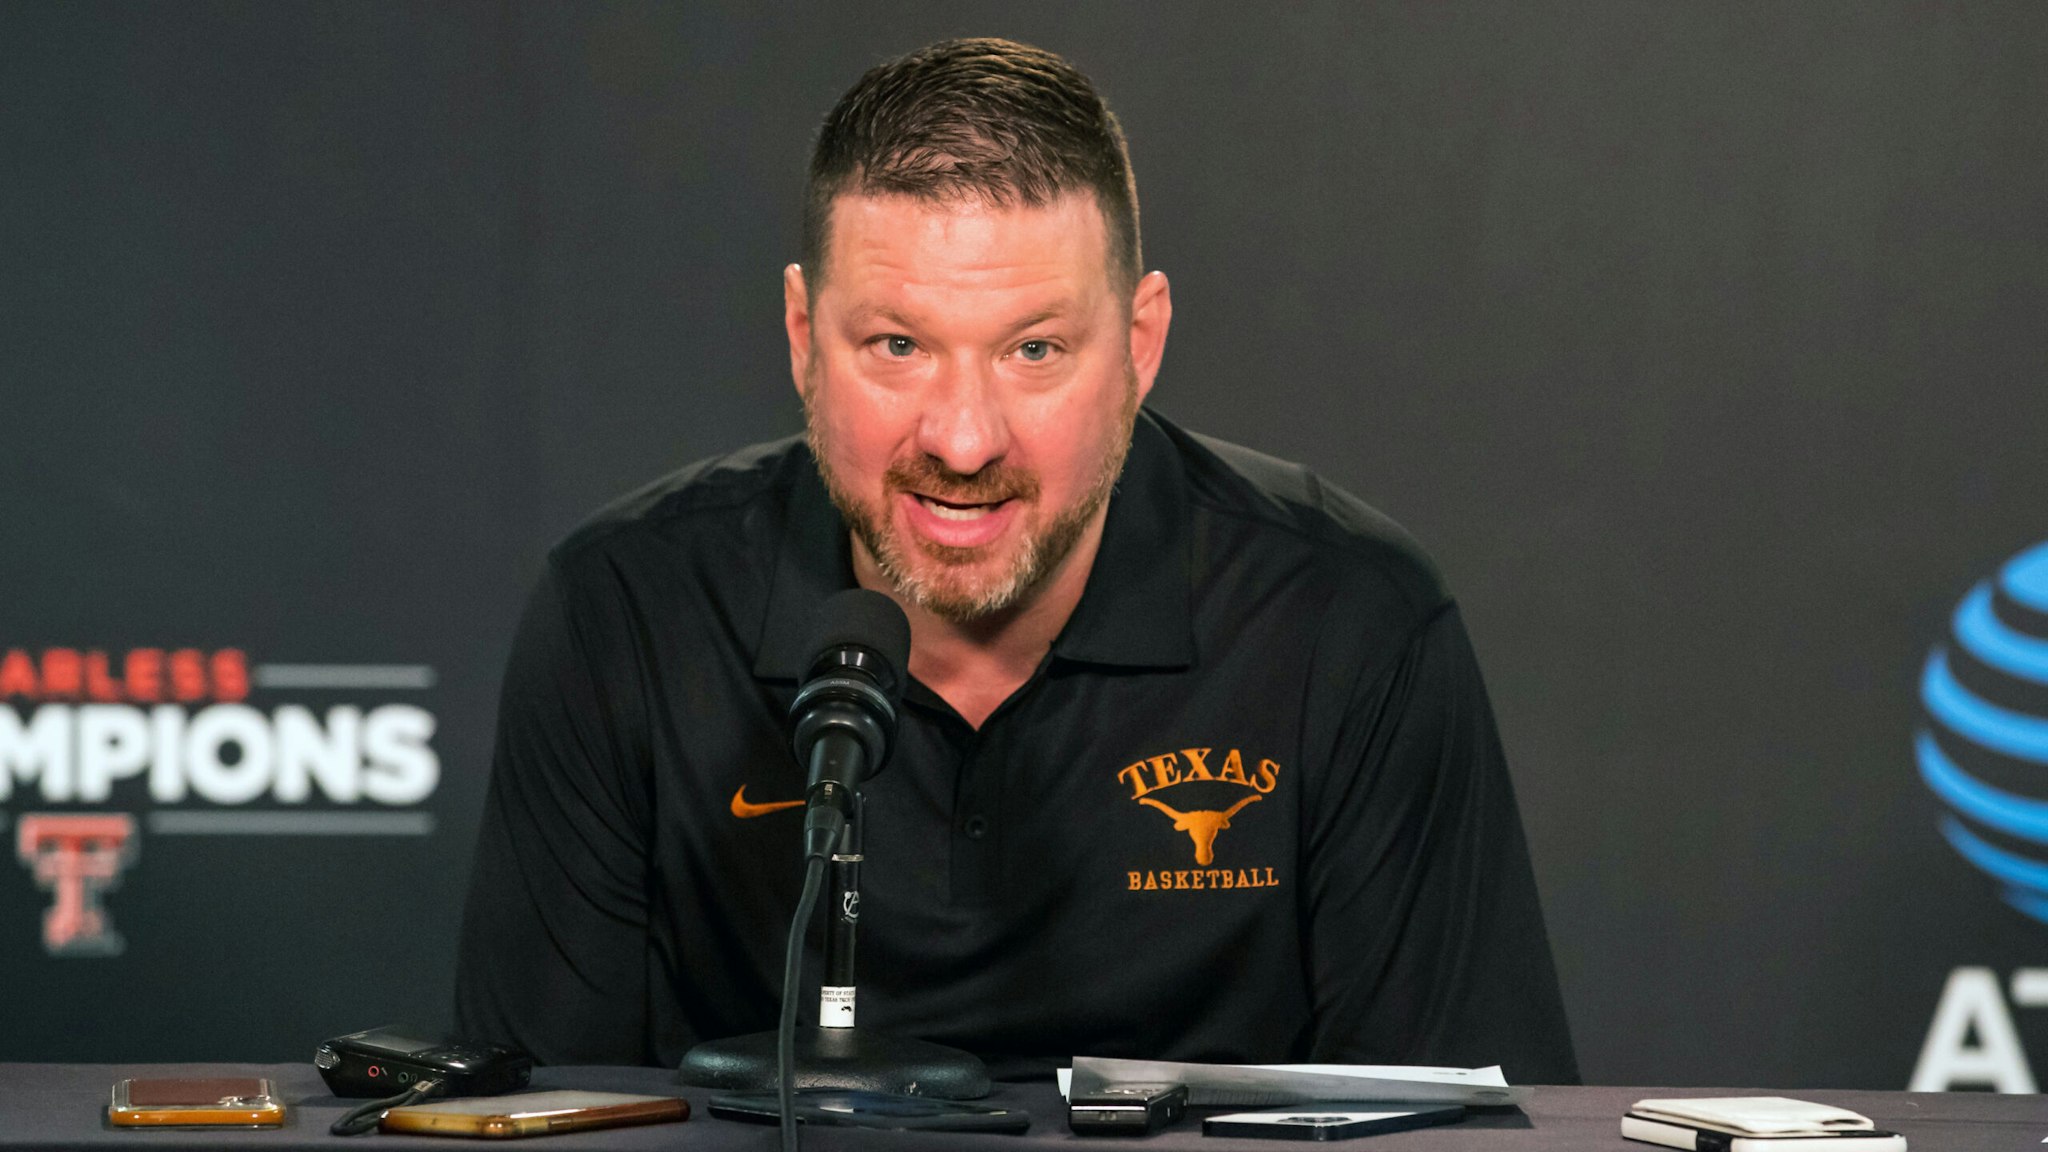 LUBBOCK, TEXAS - FEBRUARY 01: Head coach Chris Beard of the Texas Longhorns addresses the media after the college basketball game against the Texas Tech Red Raiders at United Supermarkets Arena on February 01, 2022 in Lubbock, Texas.